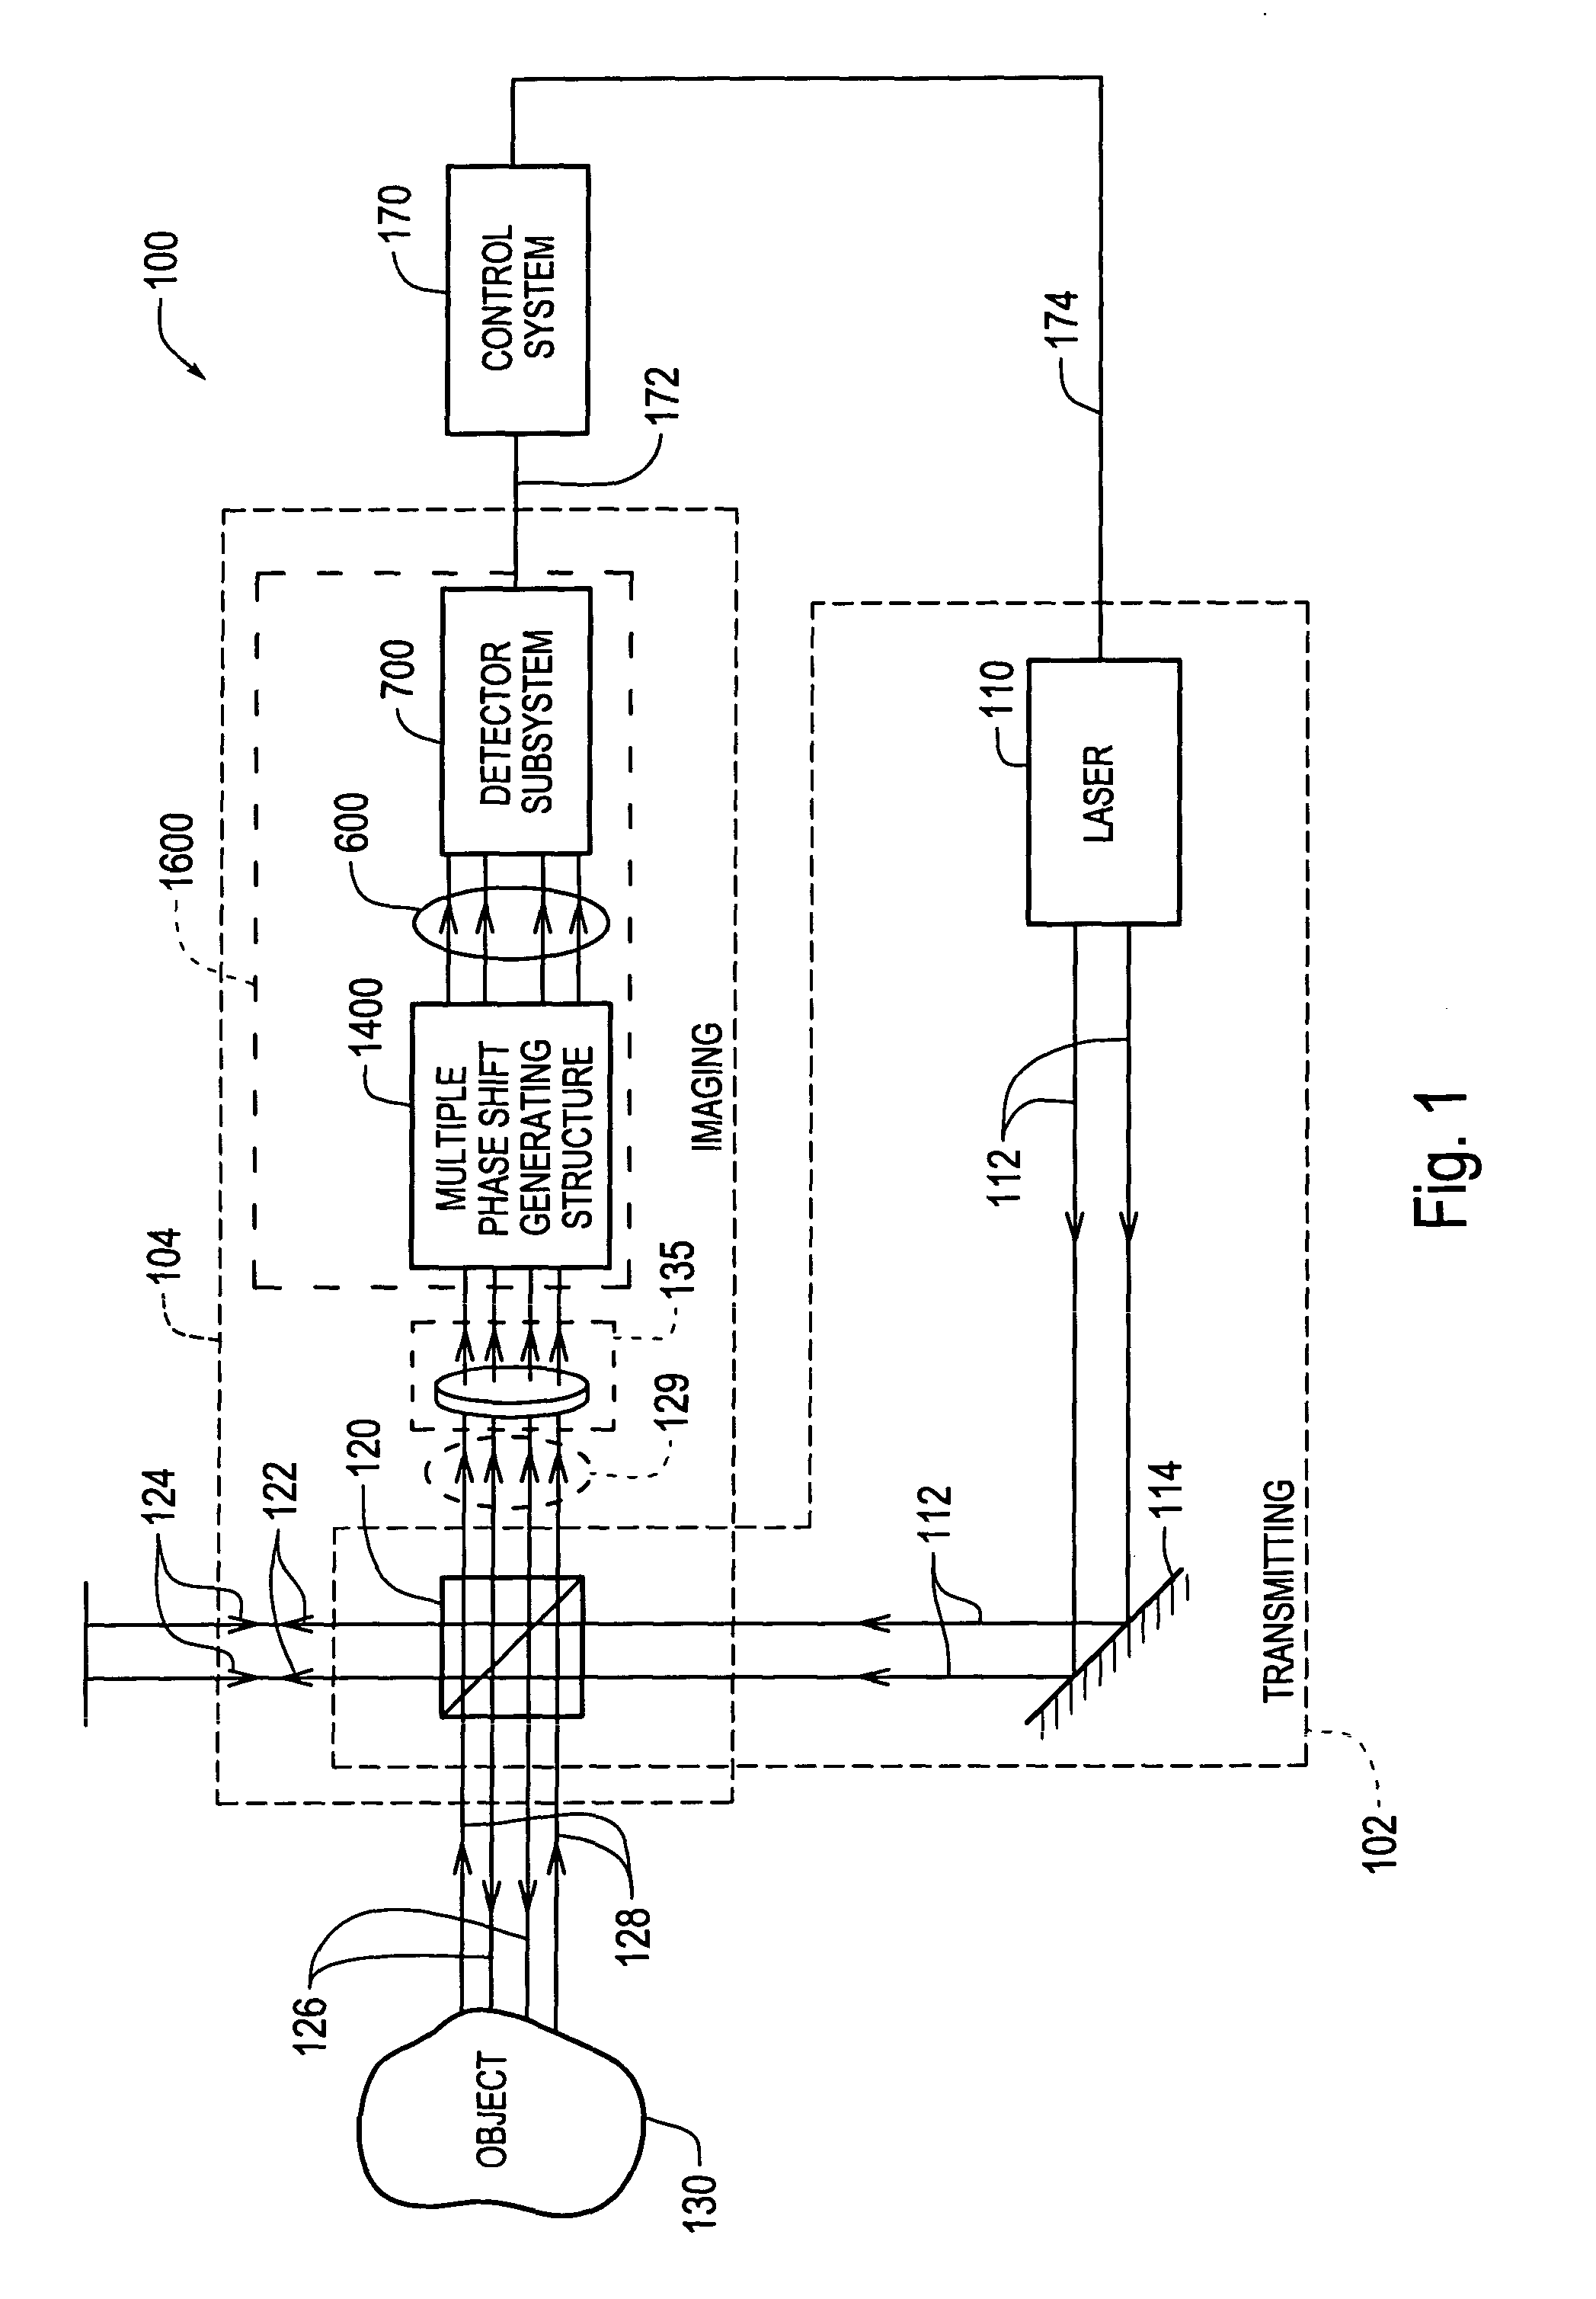 Interferometer using integrated imaging array and high-density polarizer array